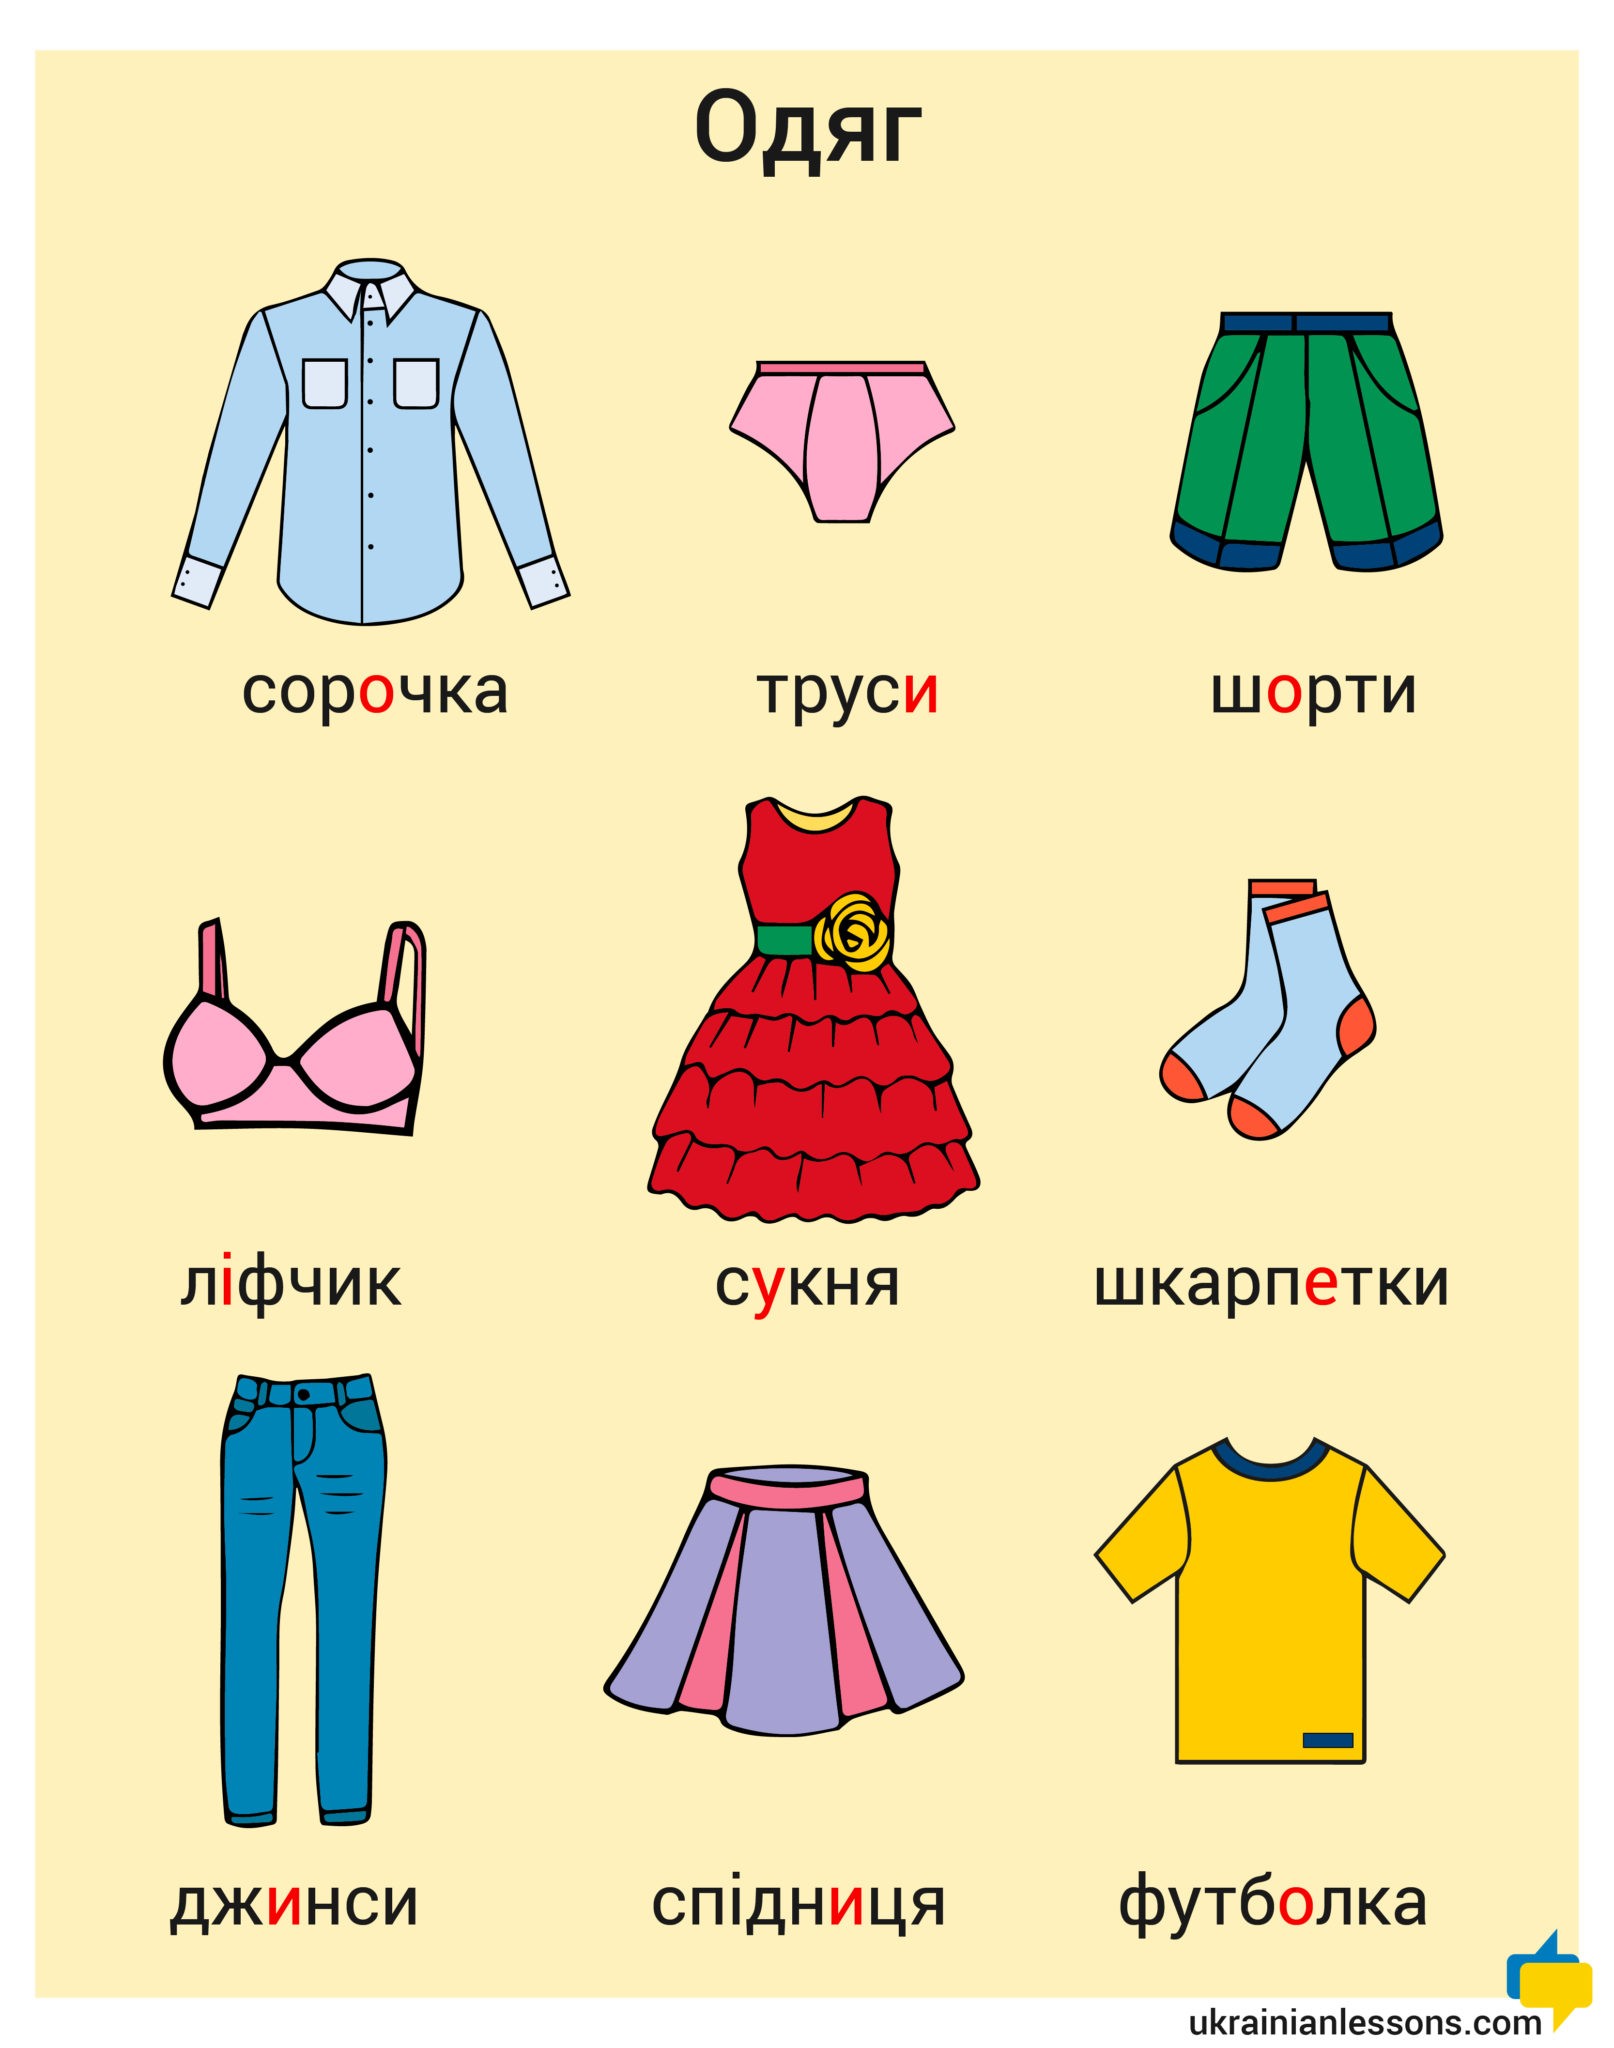 Одяг — Clothes Vocabulary in Ukrainian (with Illustrations and Audio) -  Ukrainian Lessons